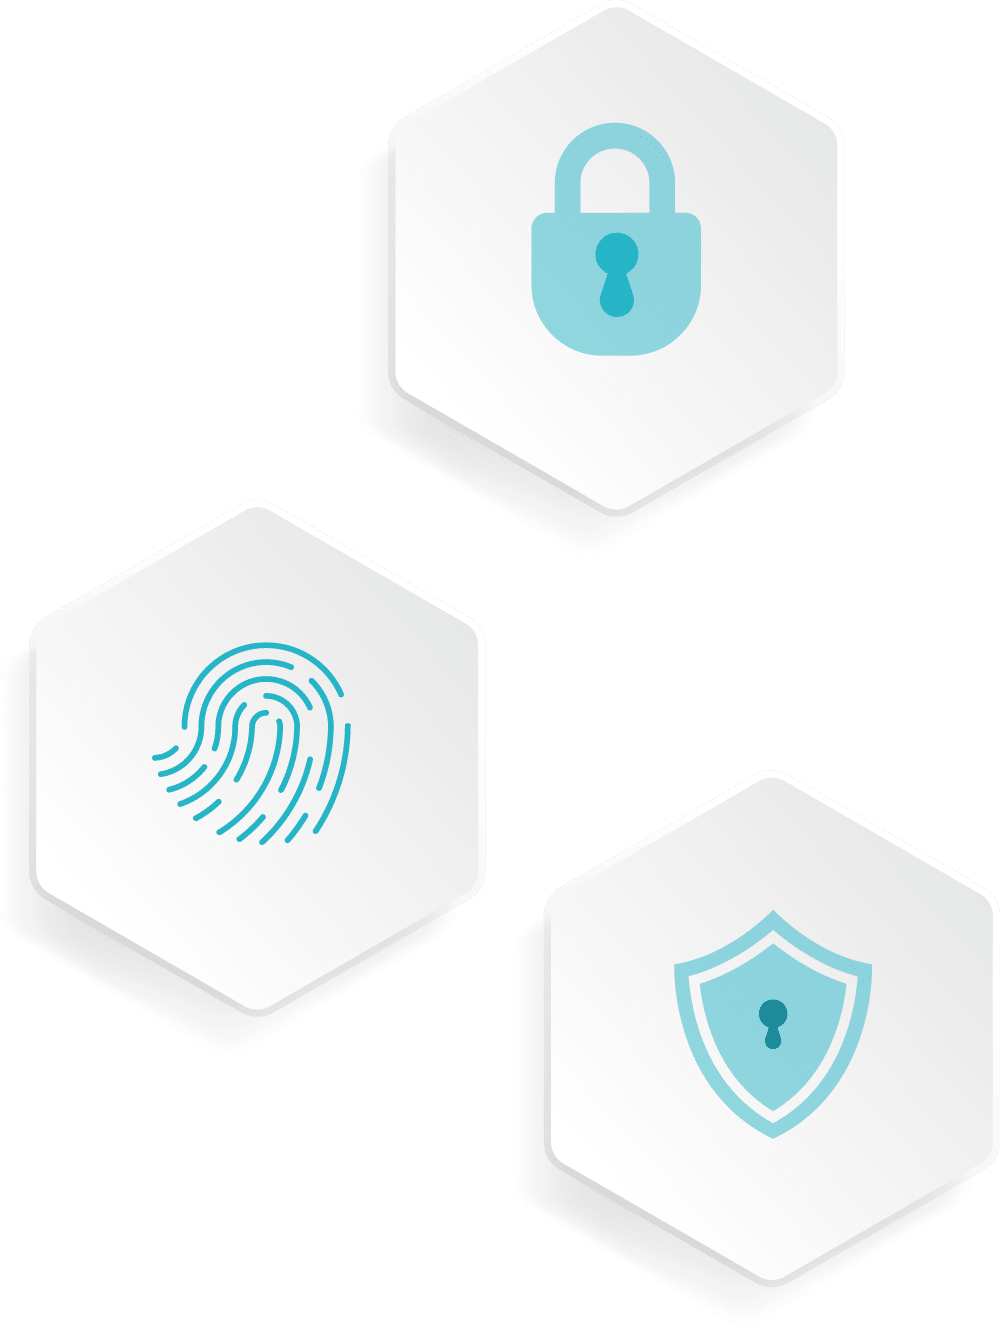 3 graphic icons to demonstrate data security